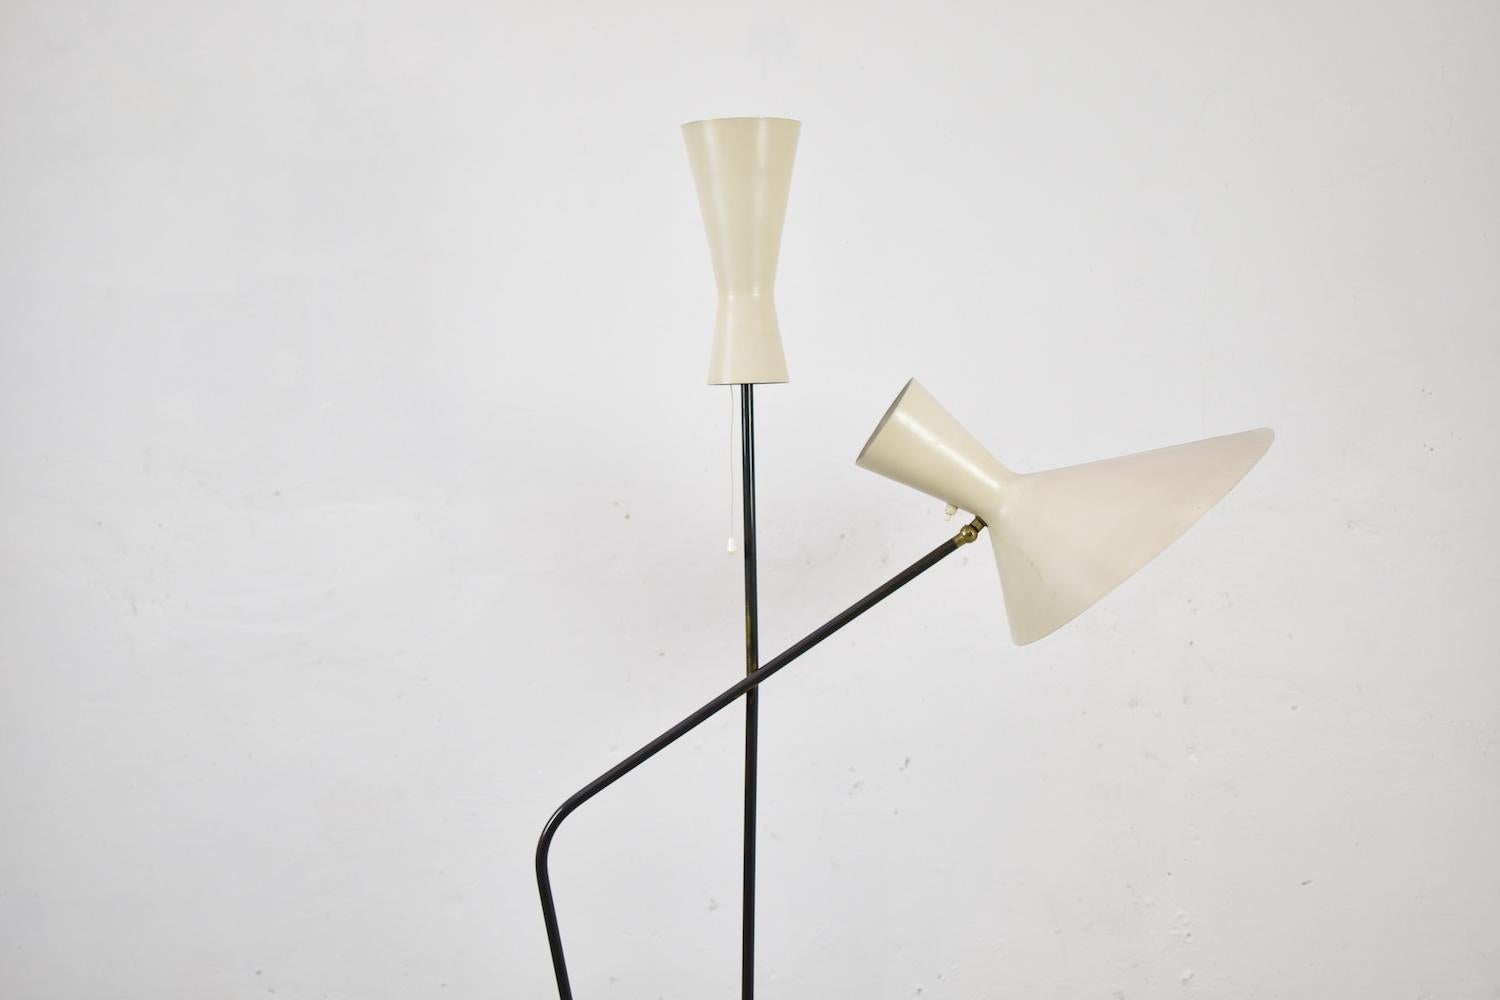 Proud to present you this ultra rare floor lamp by Professor D. Moor for BAG Bronzewaren Fabrik, Switzerland 1953. This floor lamp is made out of bronze and has two beige lacquered enameled shades. Very good original condition and rewired for